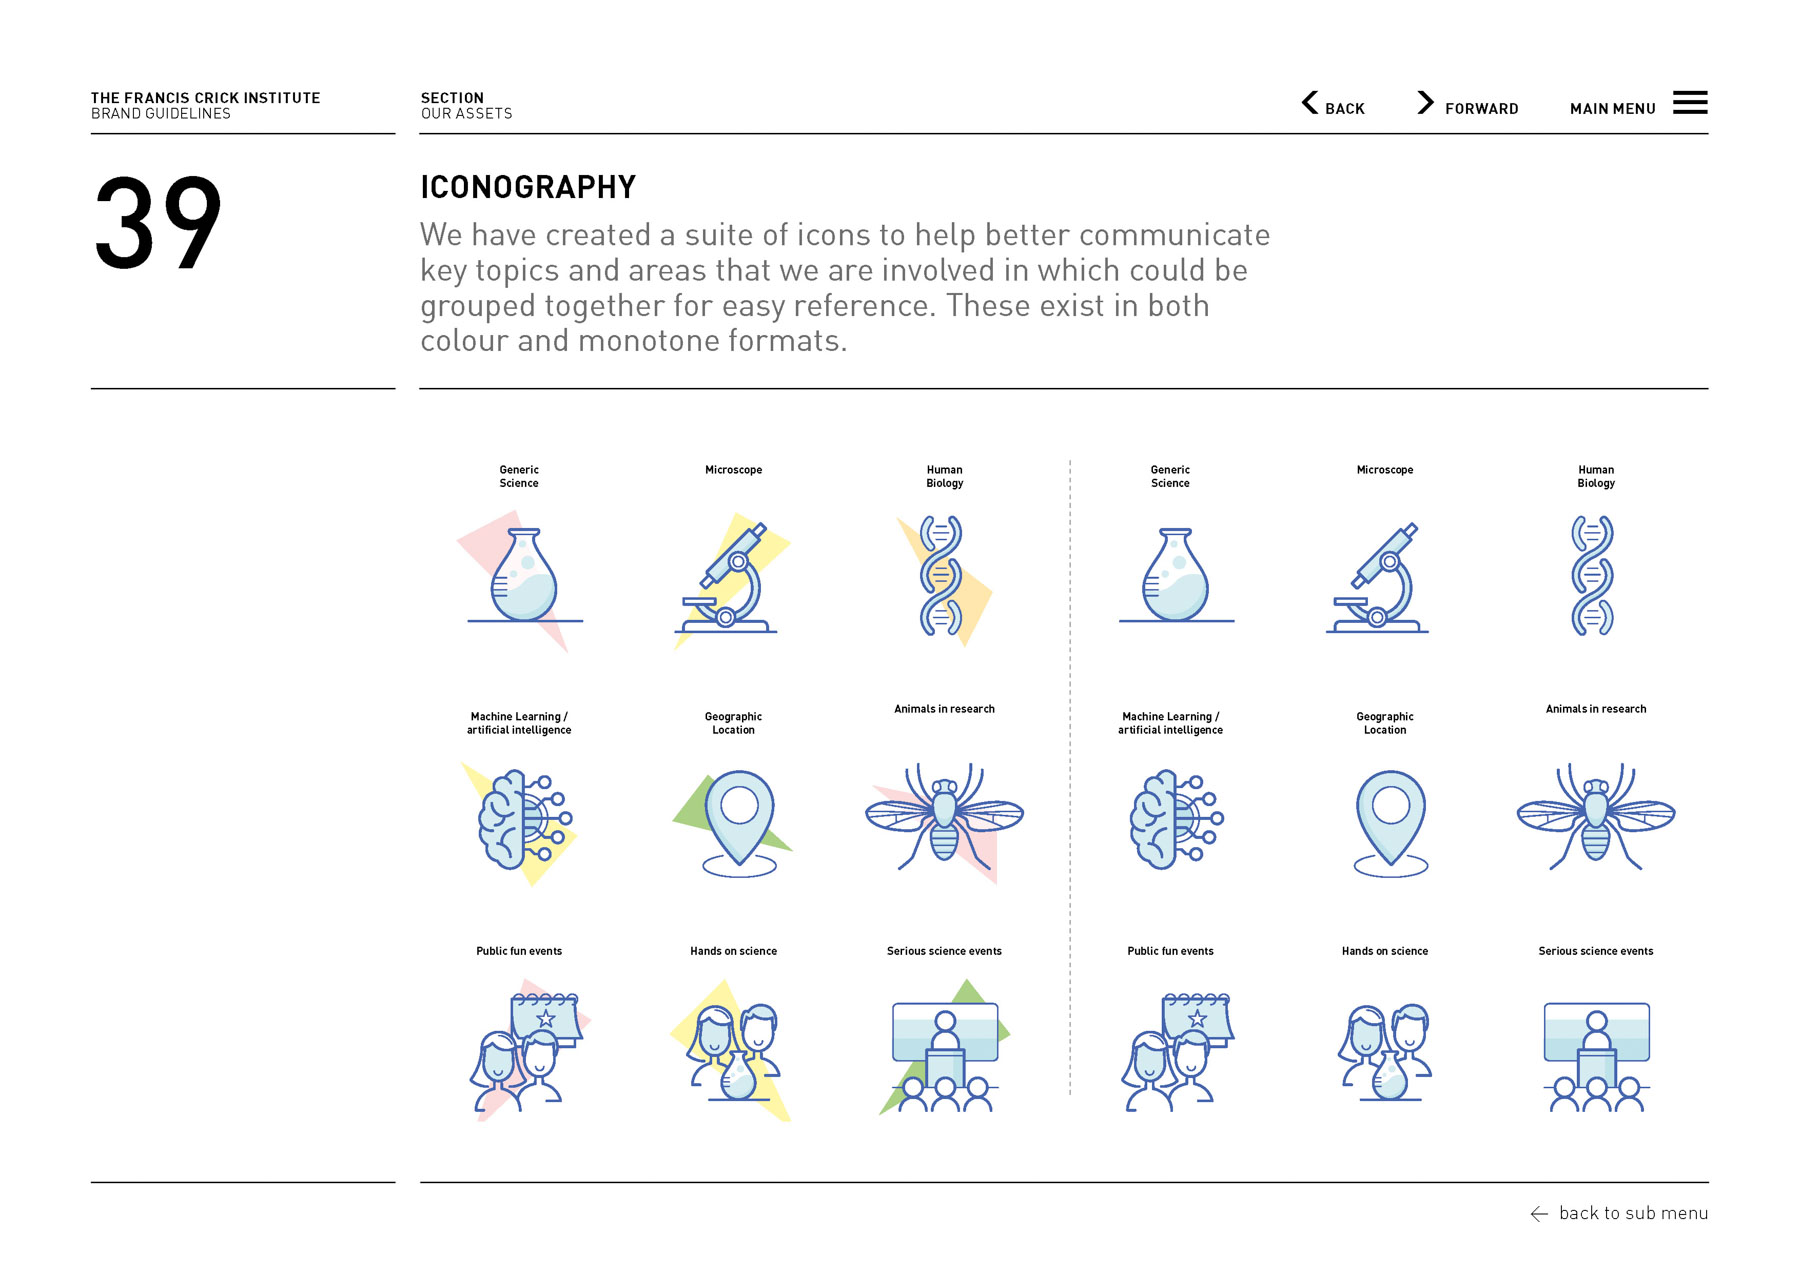 Francis Crick Brand Guidelines_Page_39